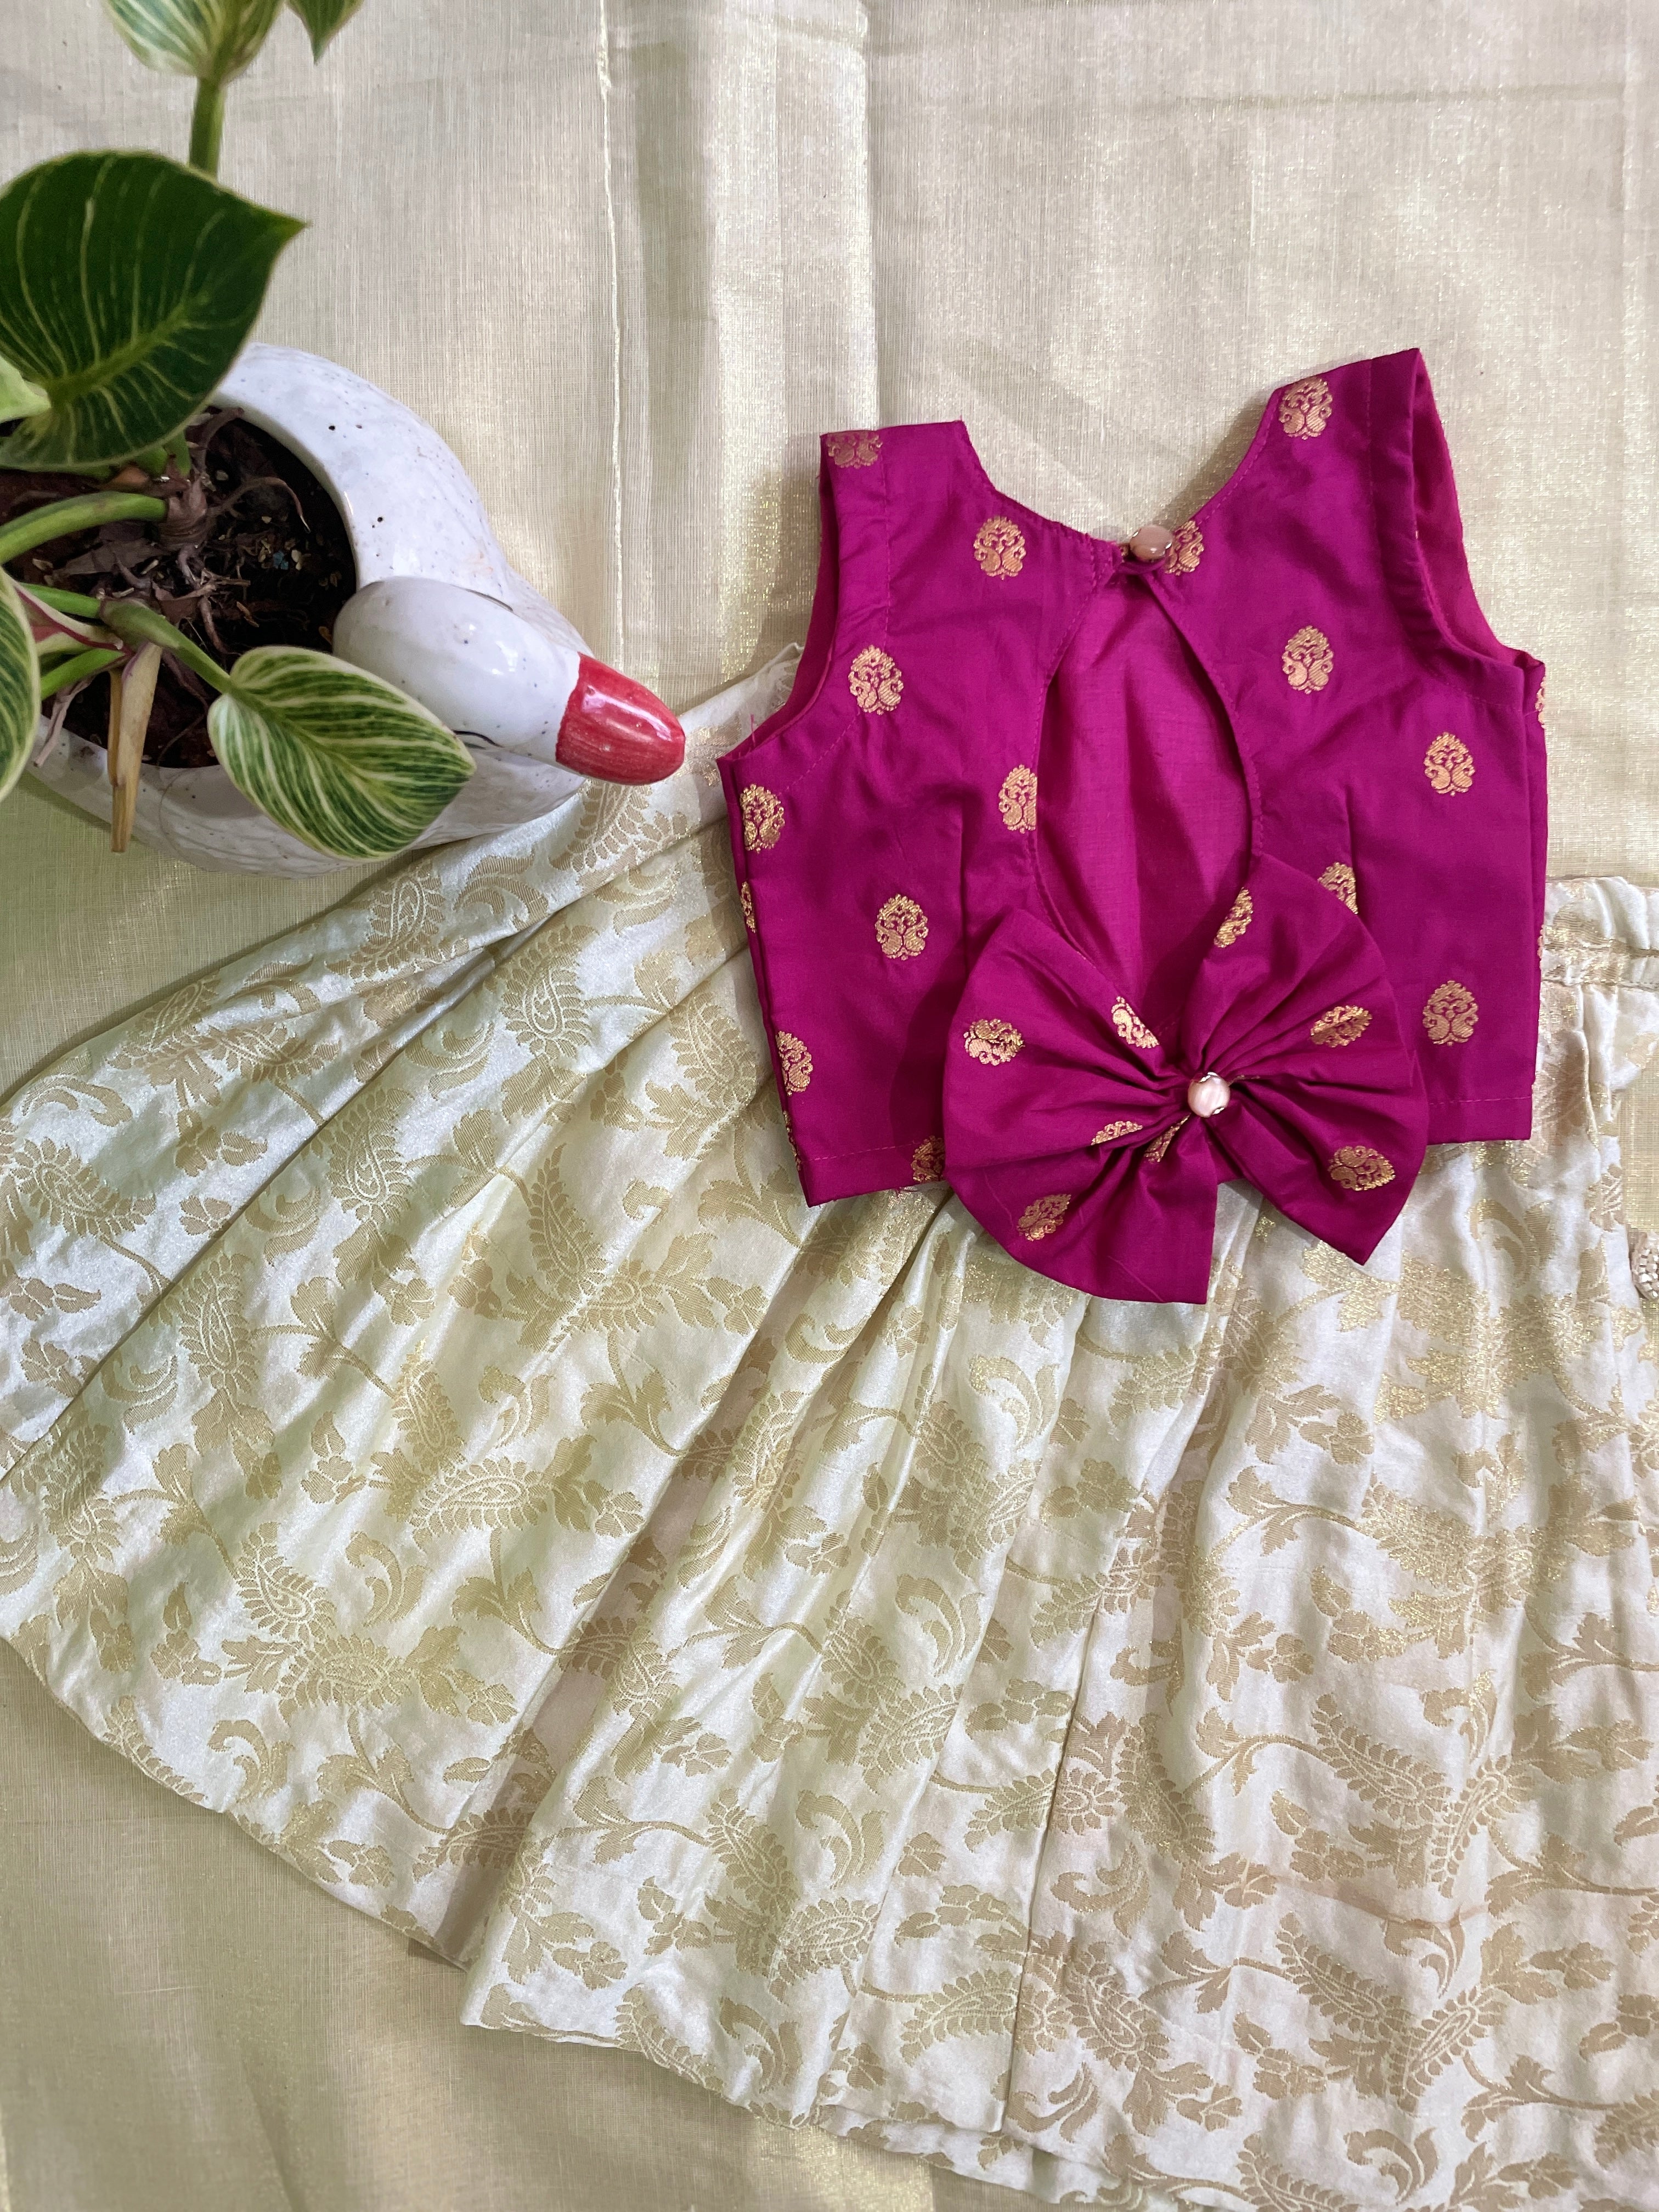 Punjabi suit on baby girl | Baby suit, Girl suit, Baby girl photography